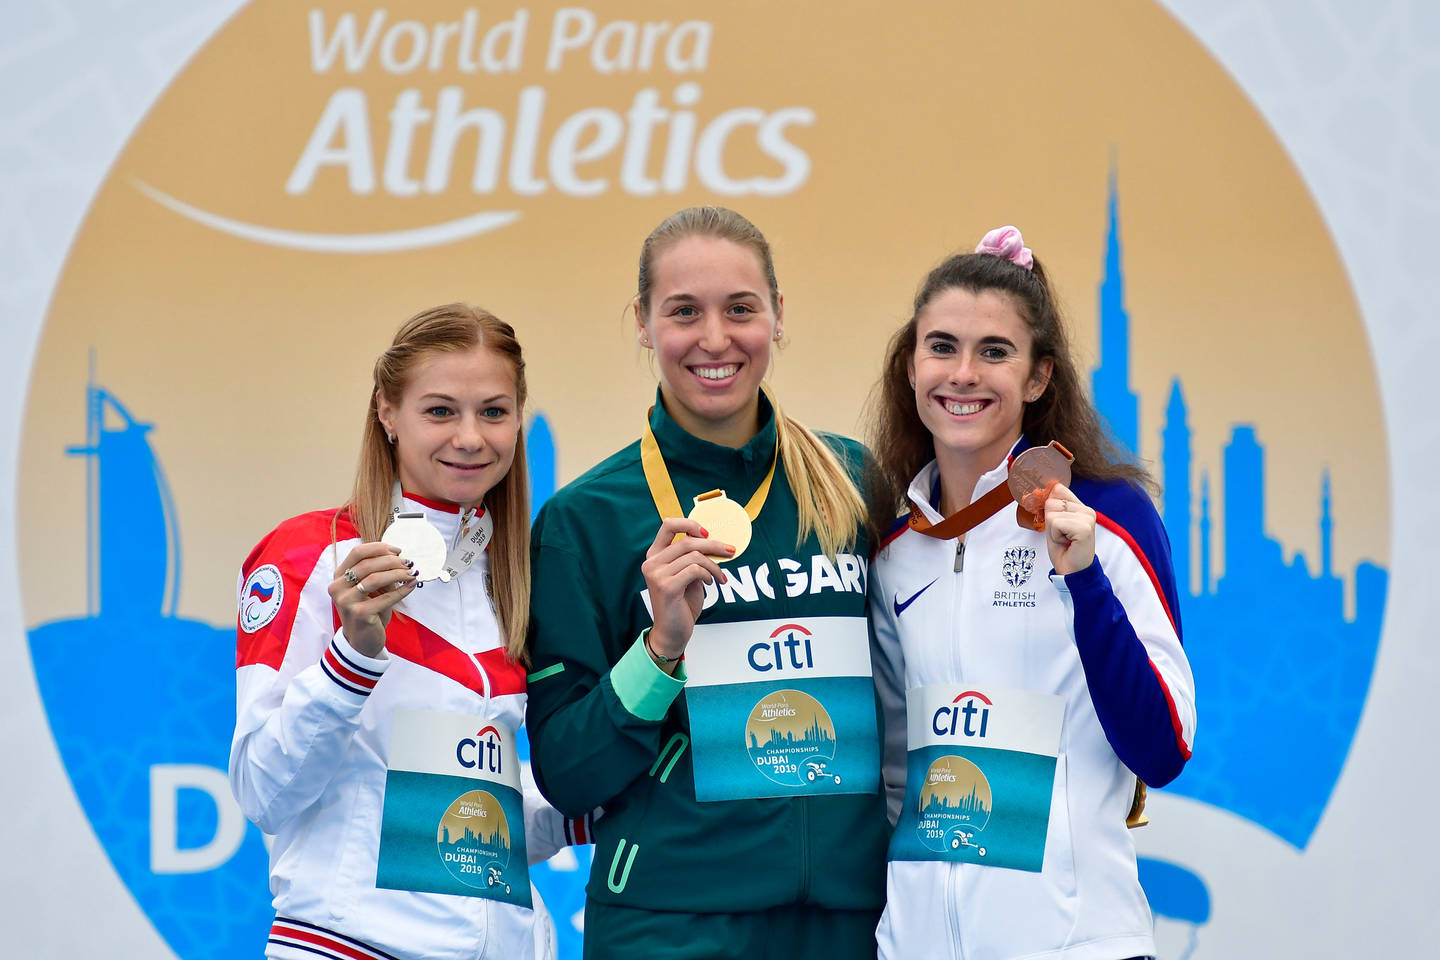 Olivia Breen on the podium after winning bronze the Worlds 2019